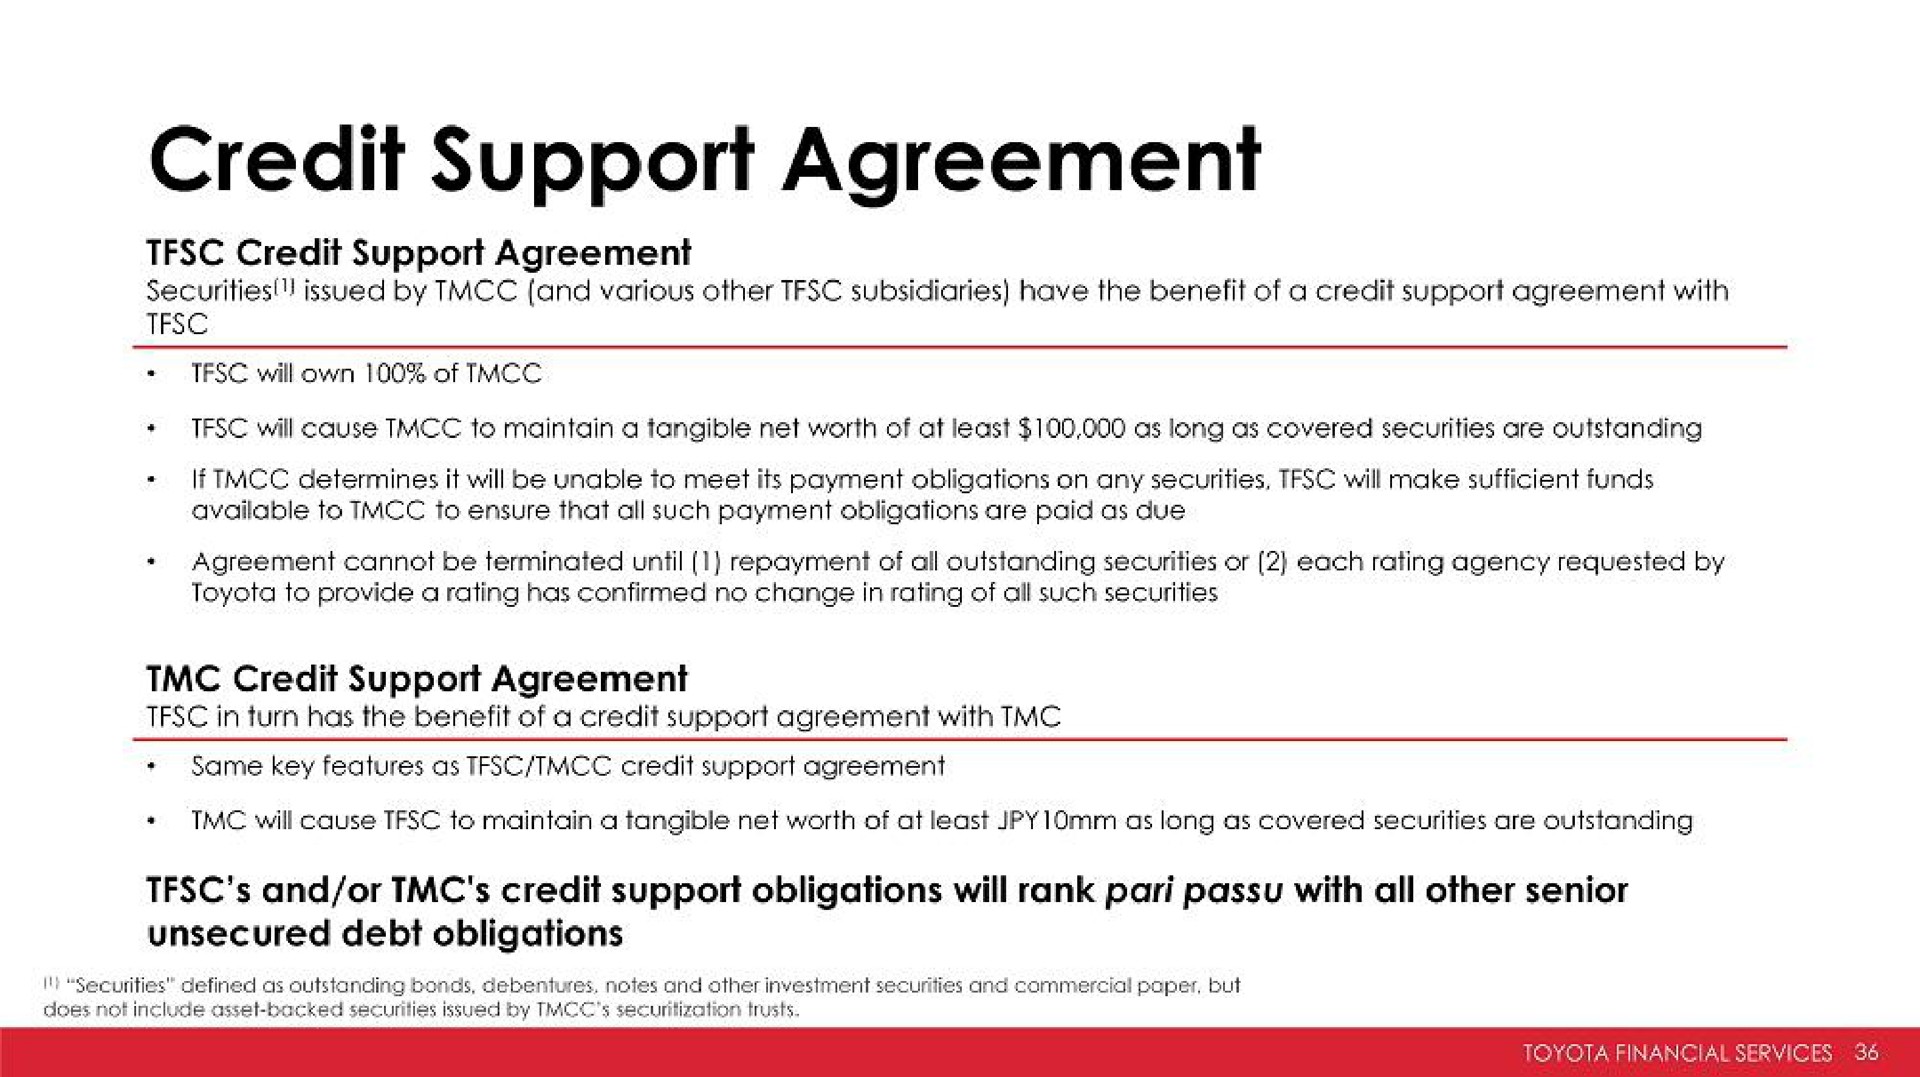 credit support agreement | Toyota